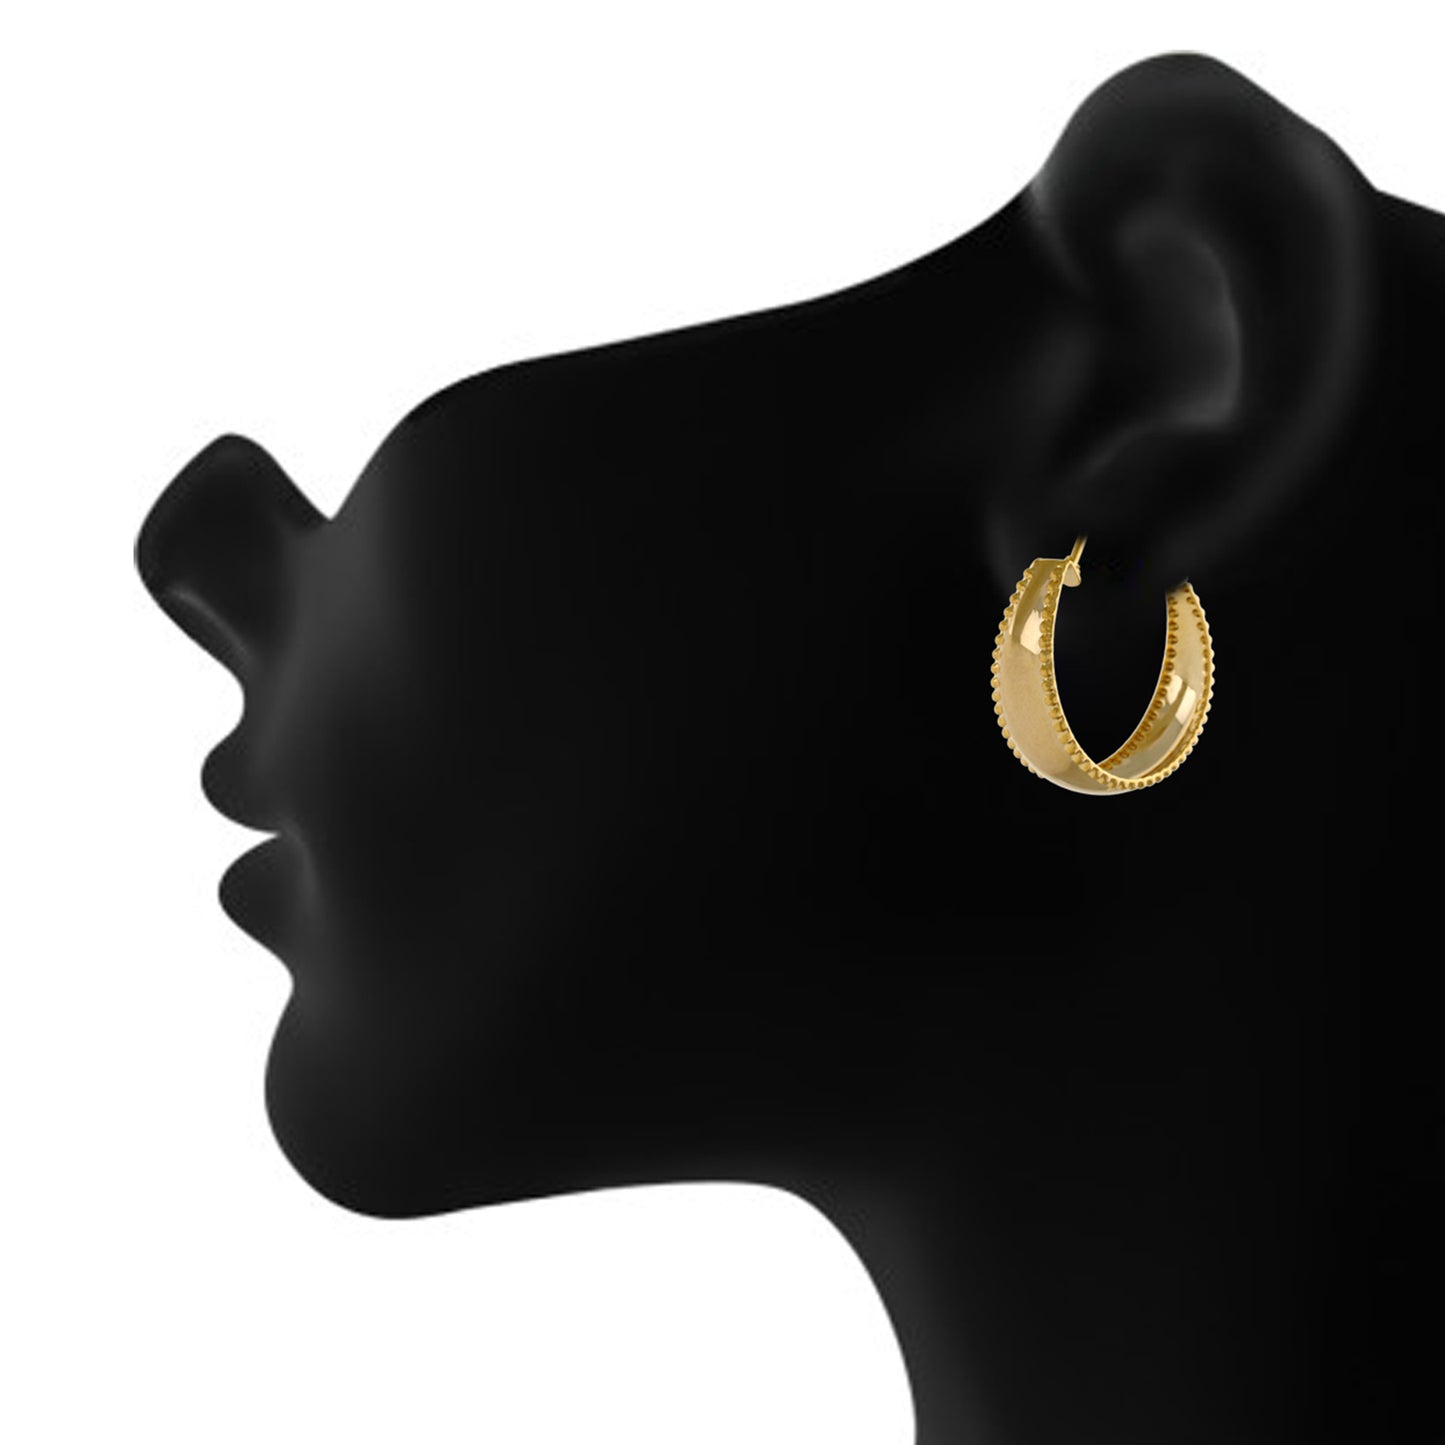 Gold colour Round Design Hoop Earrings for Girls and Women